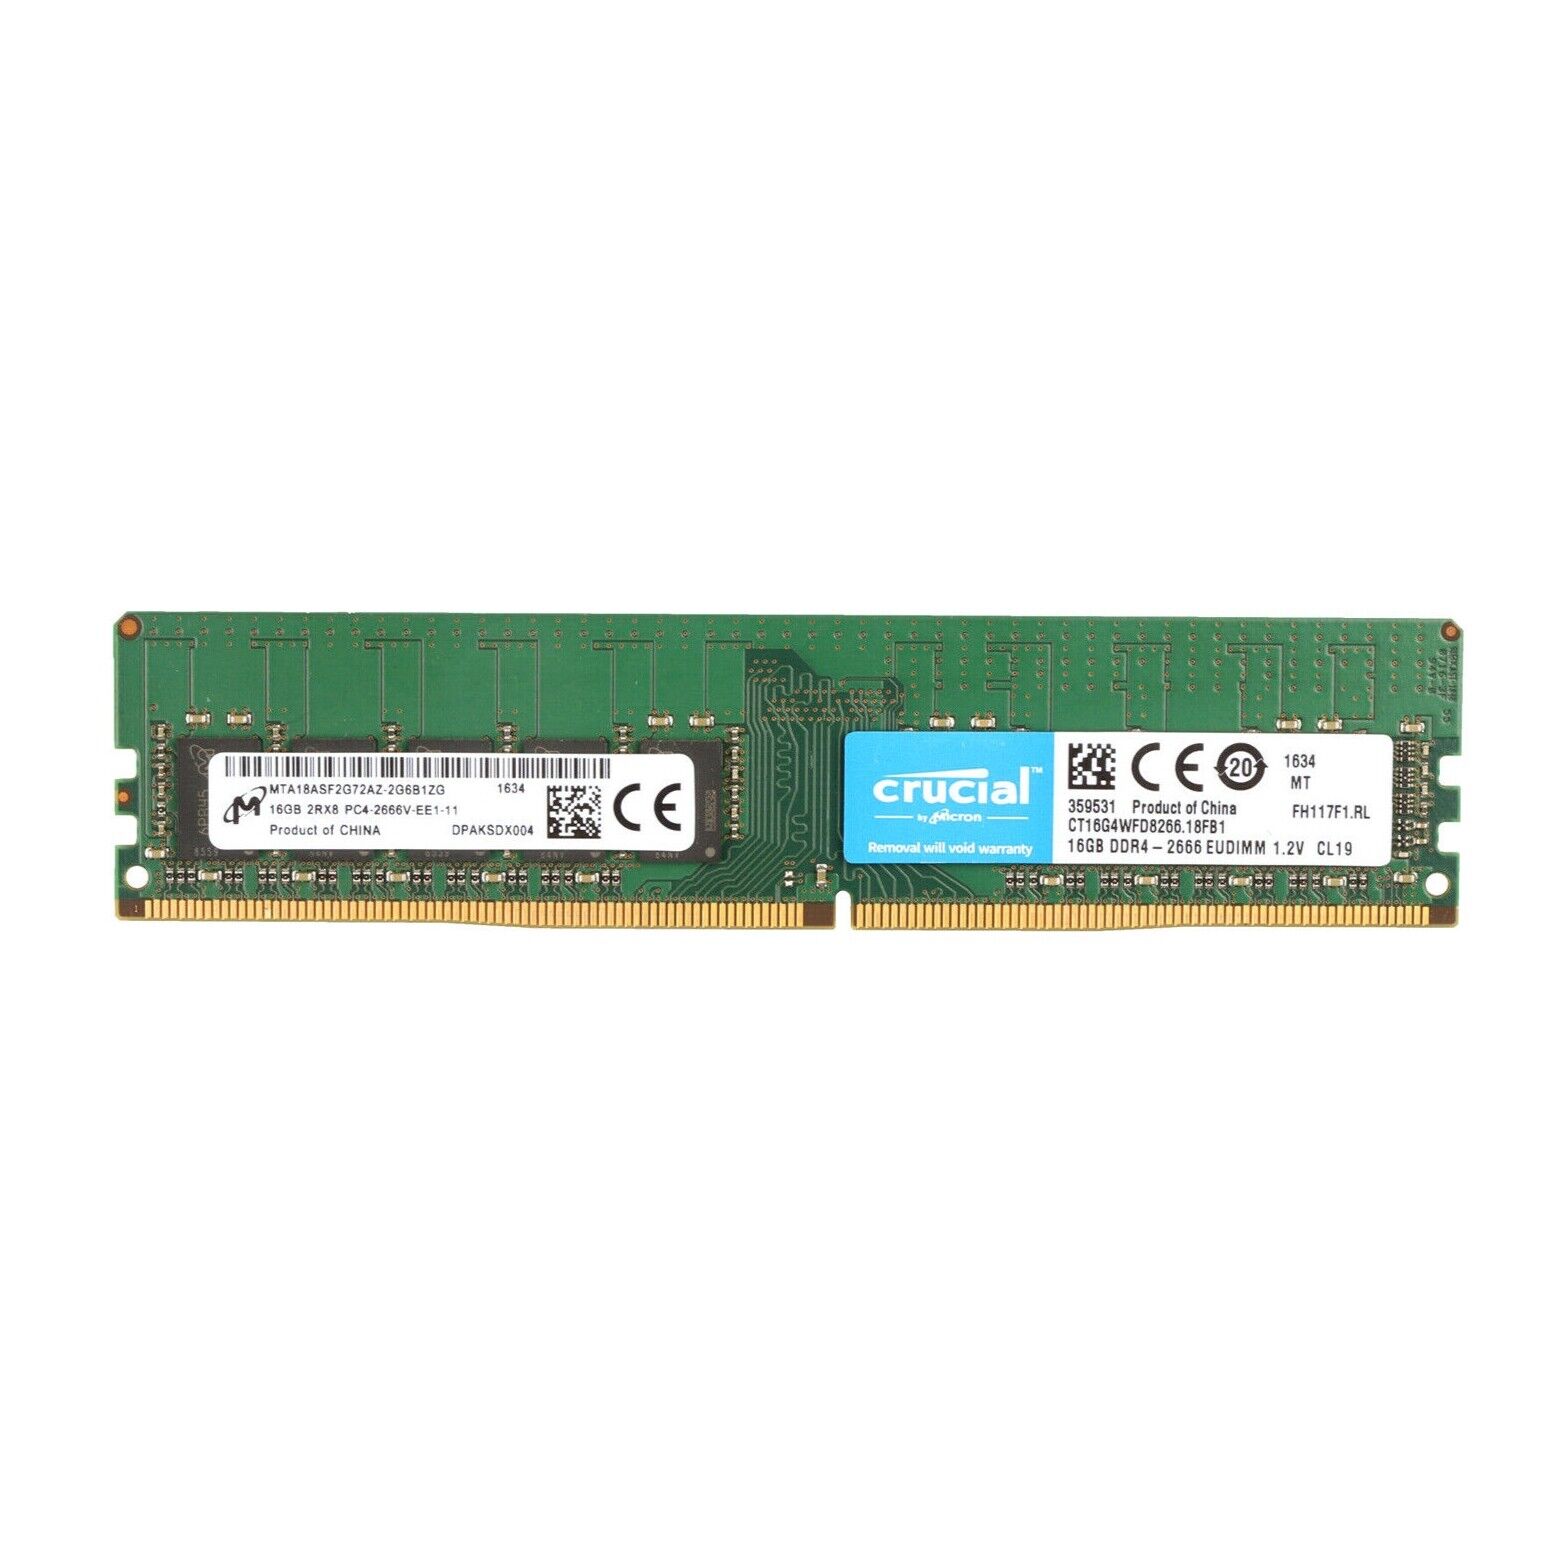 New Crucial 16GB DDR4 2666MHz PC4-21300 2RX8 CL19 ECC UDIMM Memory CT16G4WFD8266